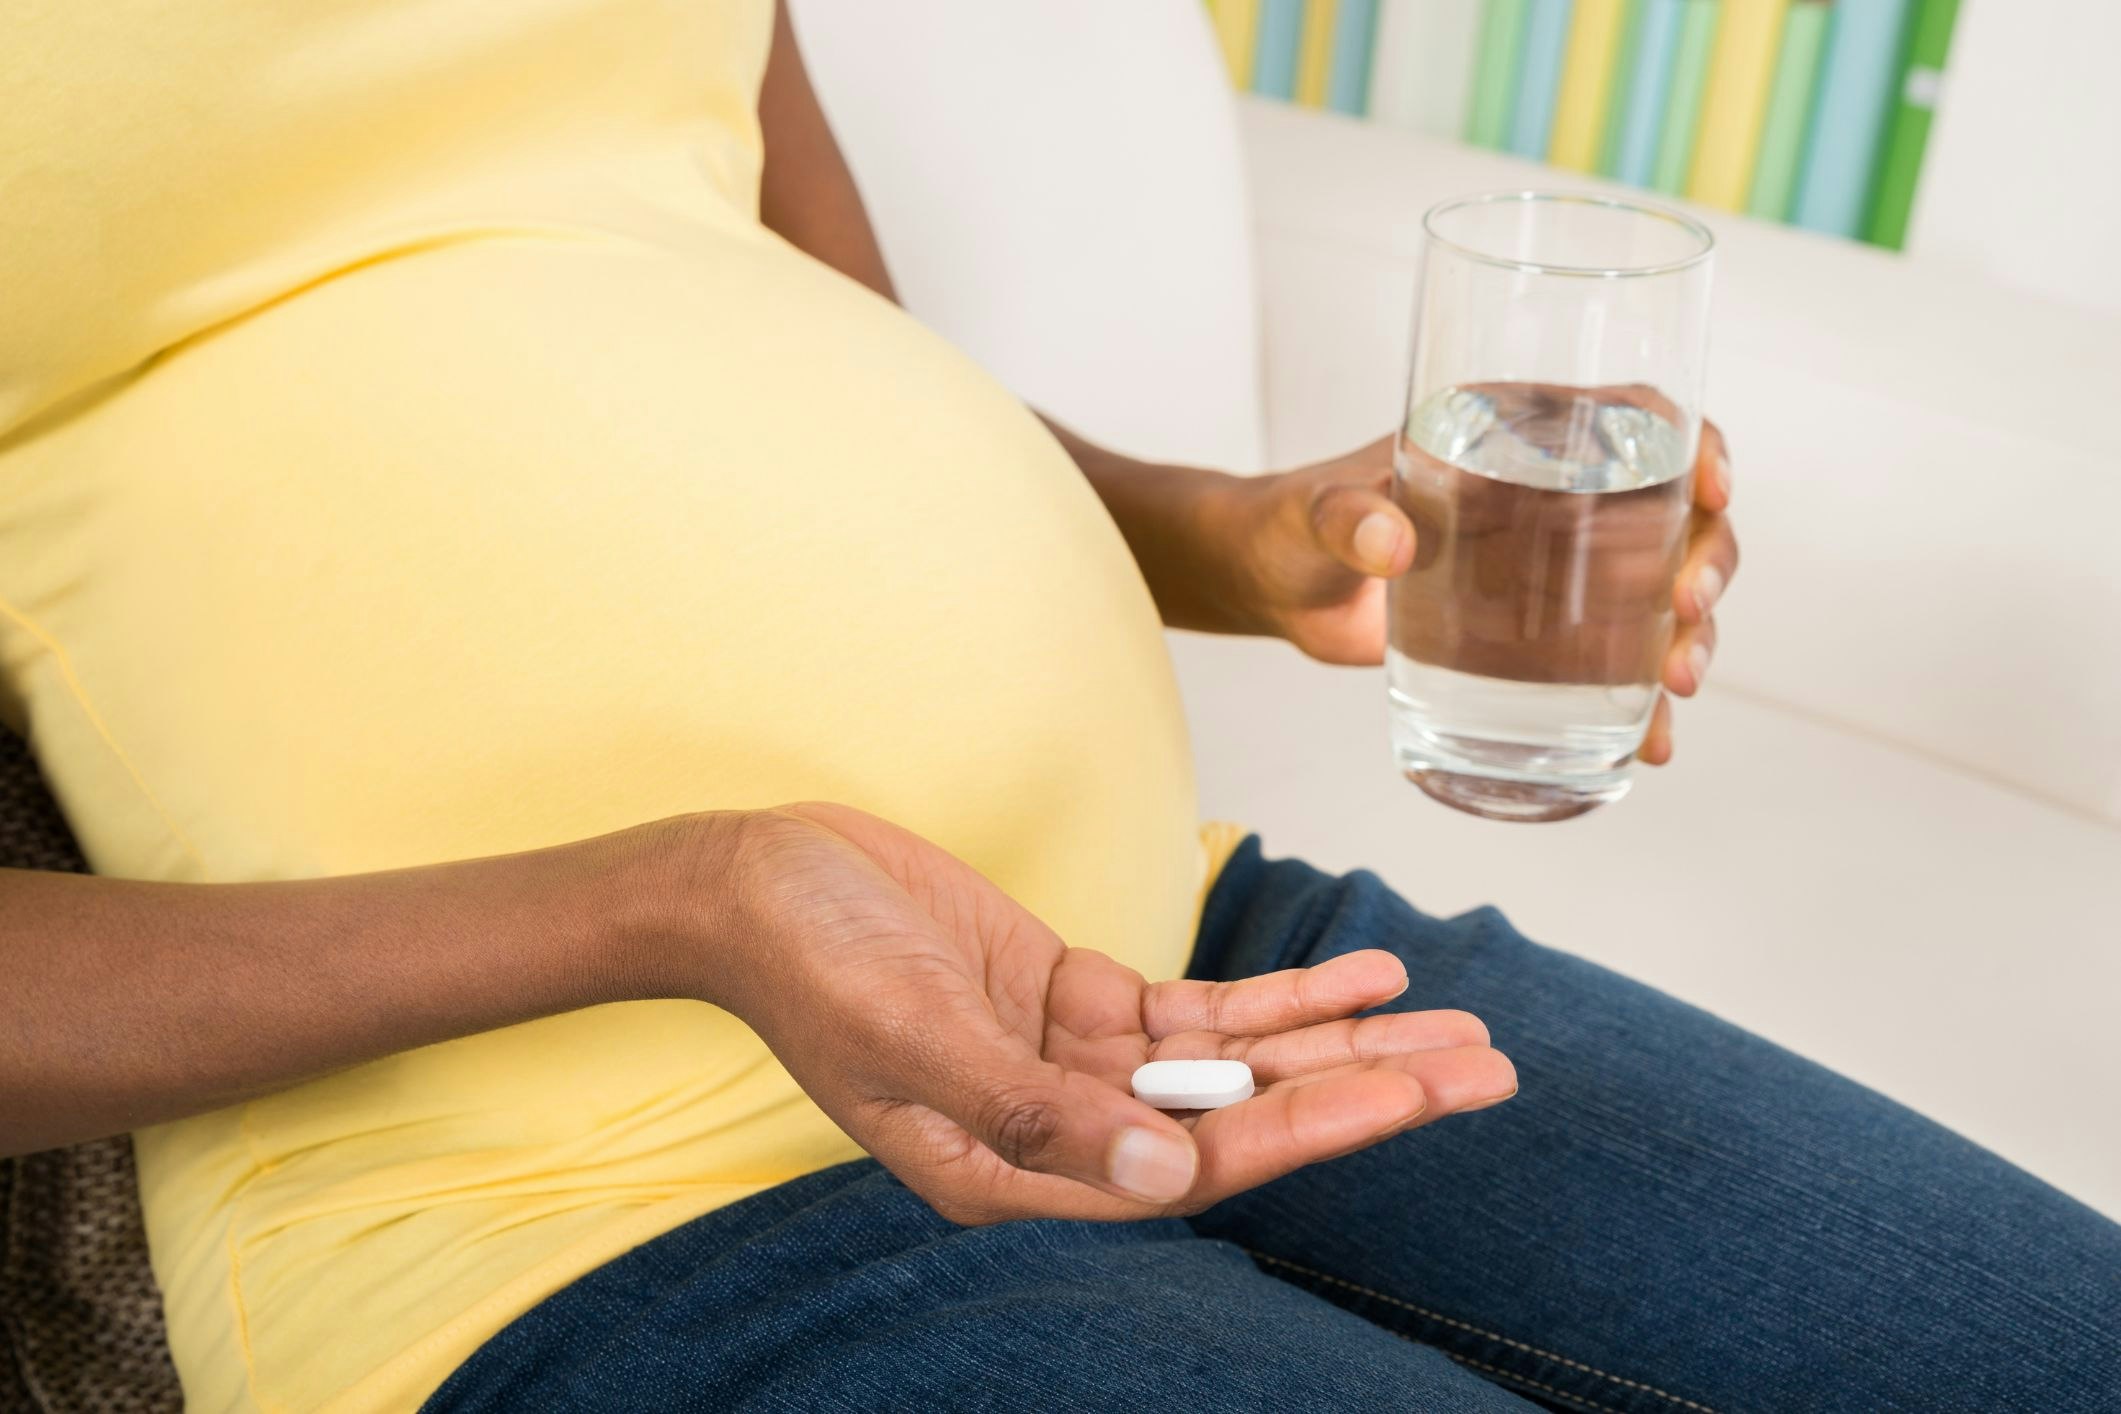 <p>Researchers at an Australian university have recently collaborated with other organisations to study the effects of antipsychotic medication use in pregnancy. [Source: Shutterstock]</p>
